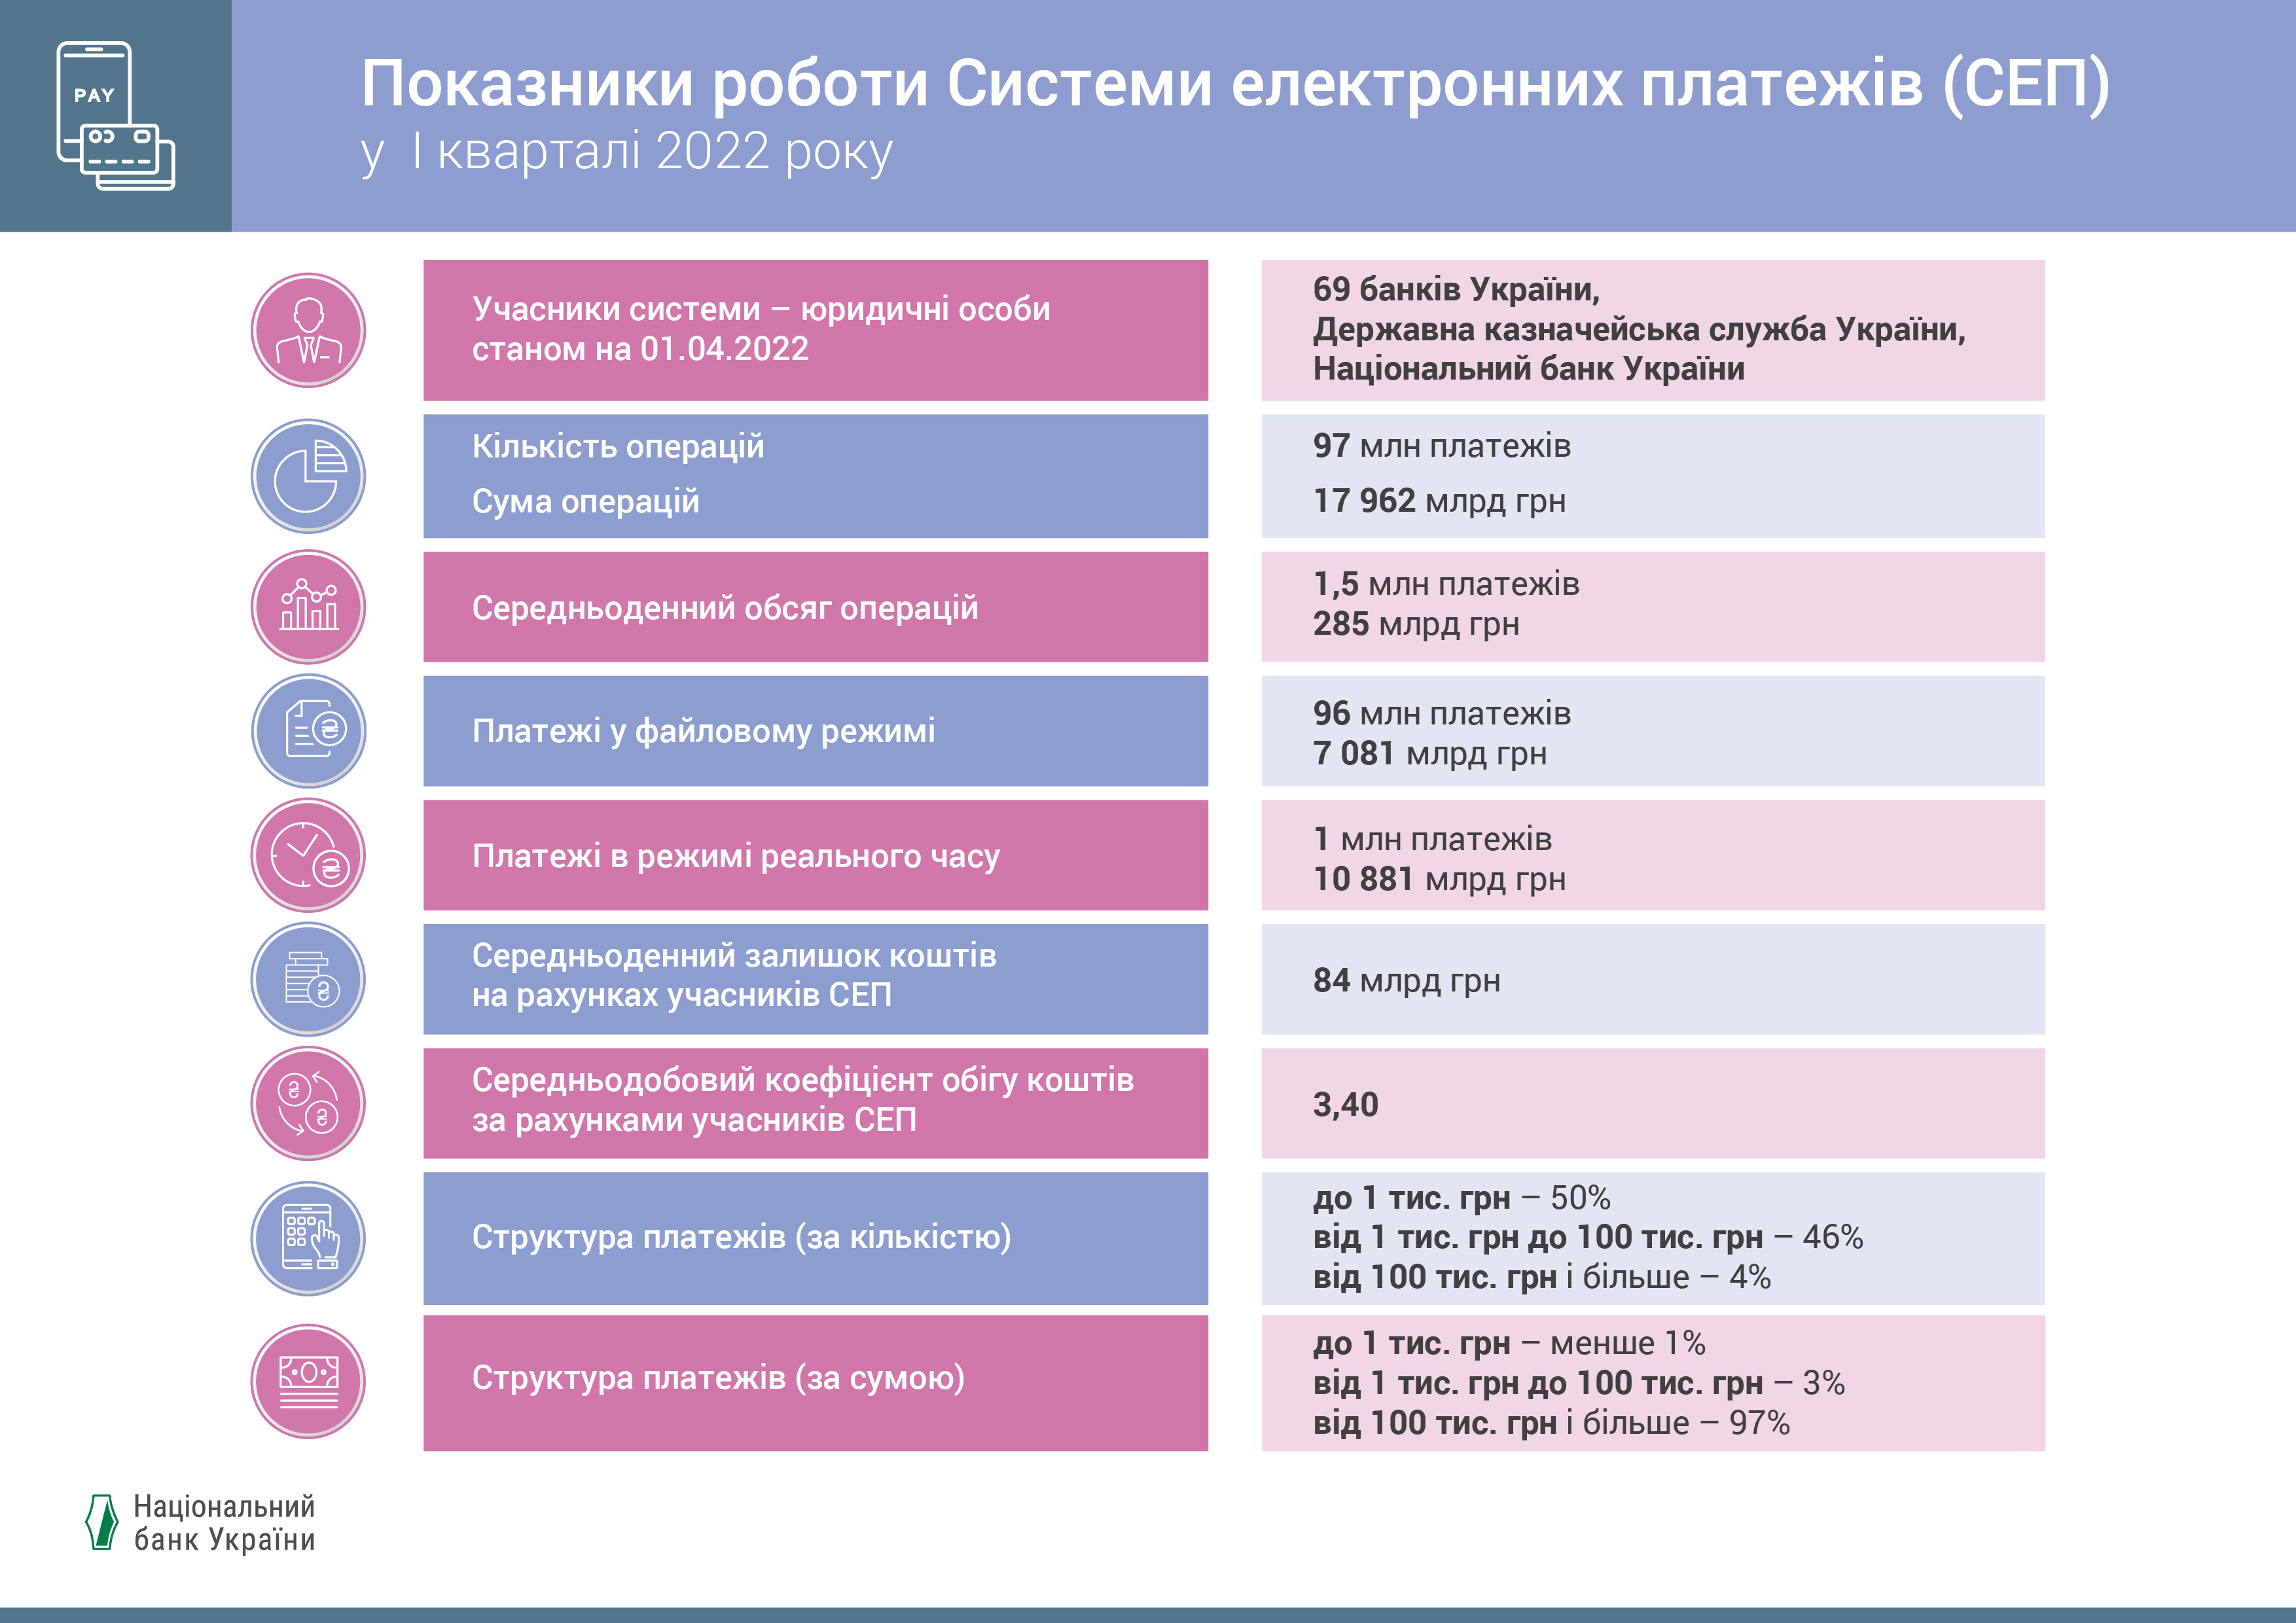 SEP. Facts and figures, Q1 2022 (UKR)